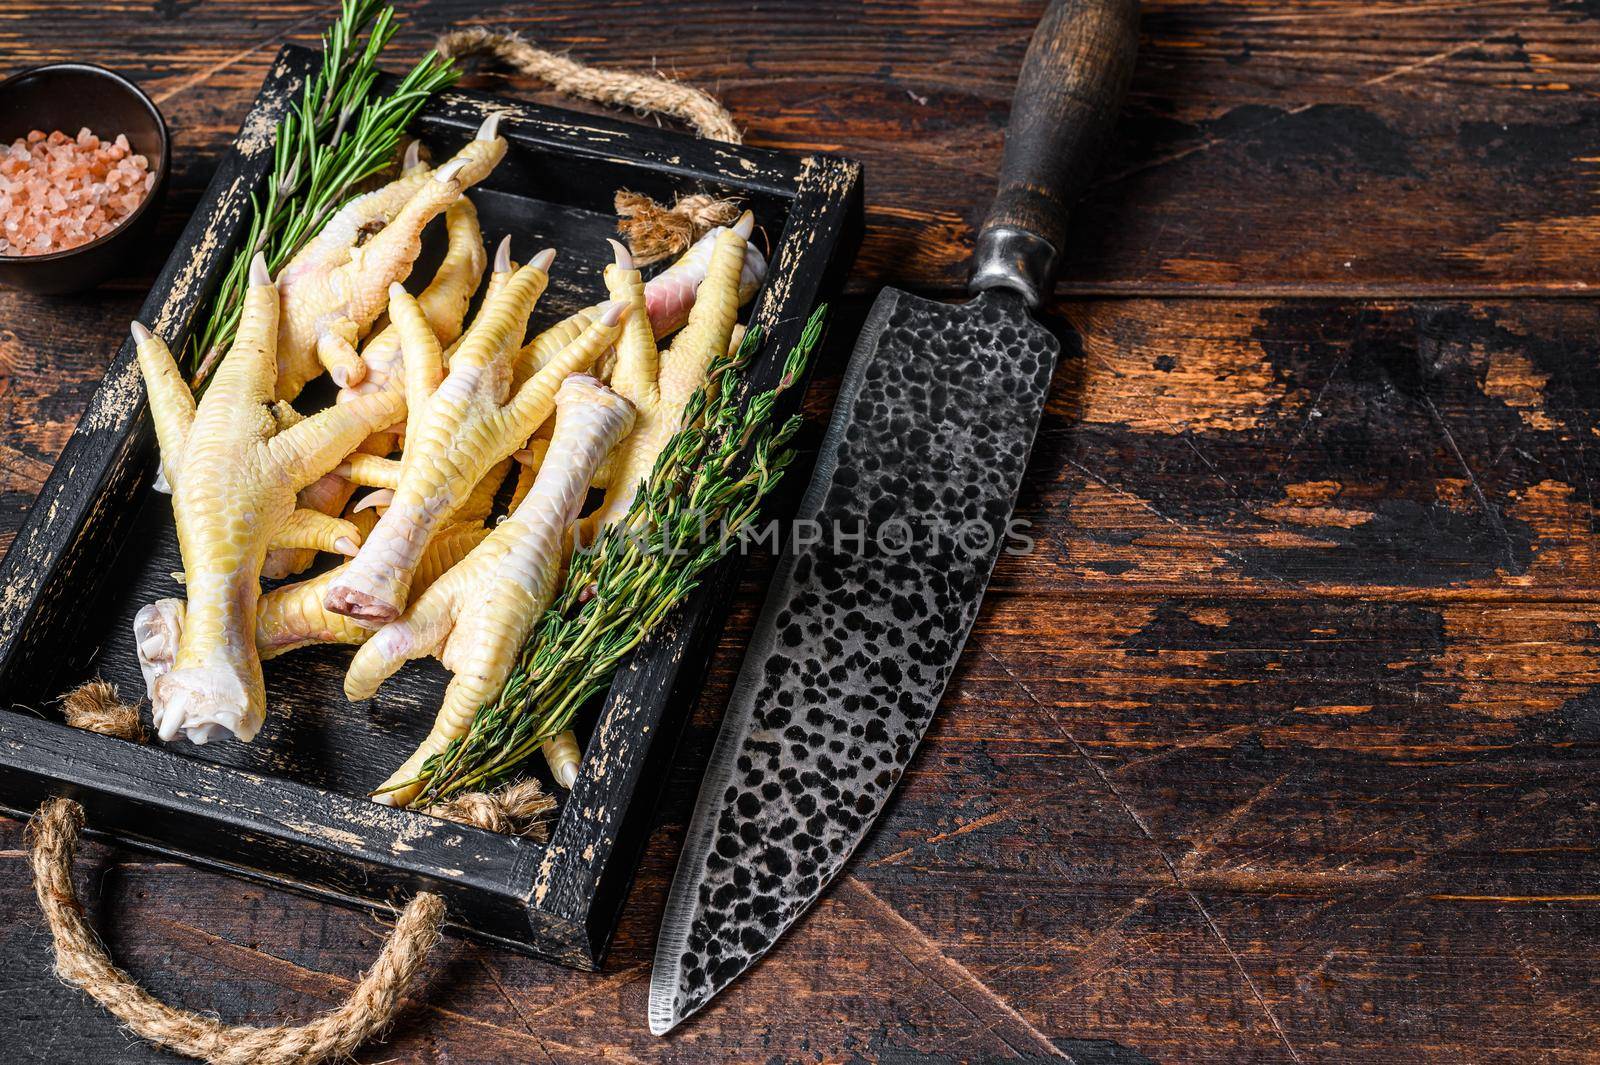 Raw Chicken paws feets on butcher chopping board with knife. Dark wooden background. Top view. Copy space.